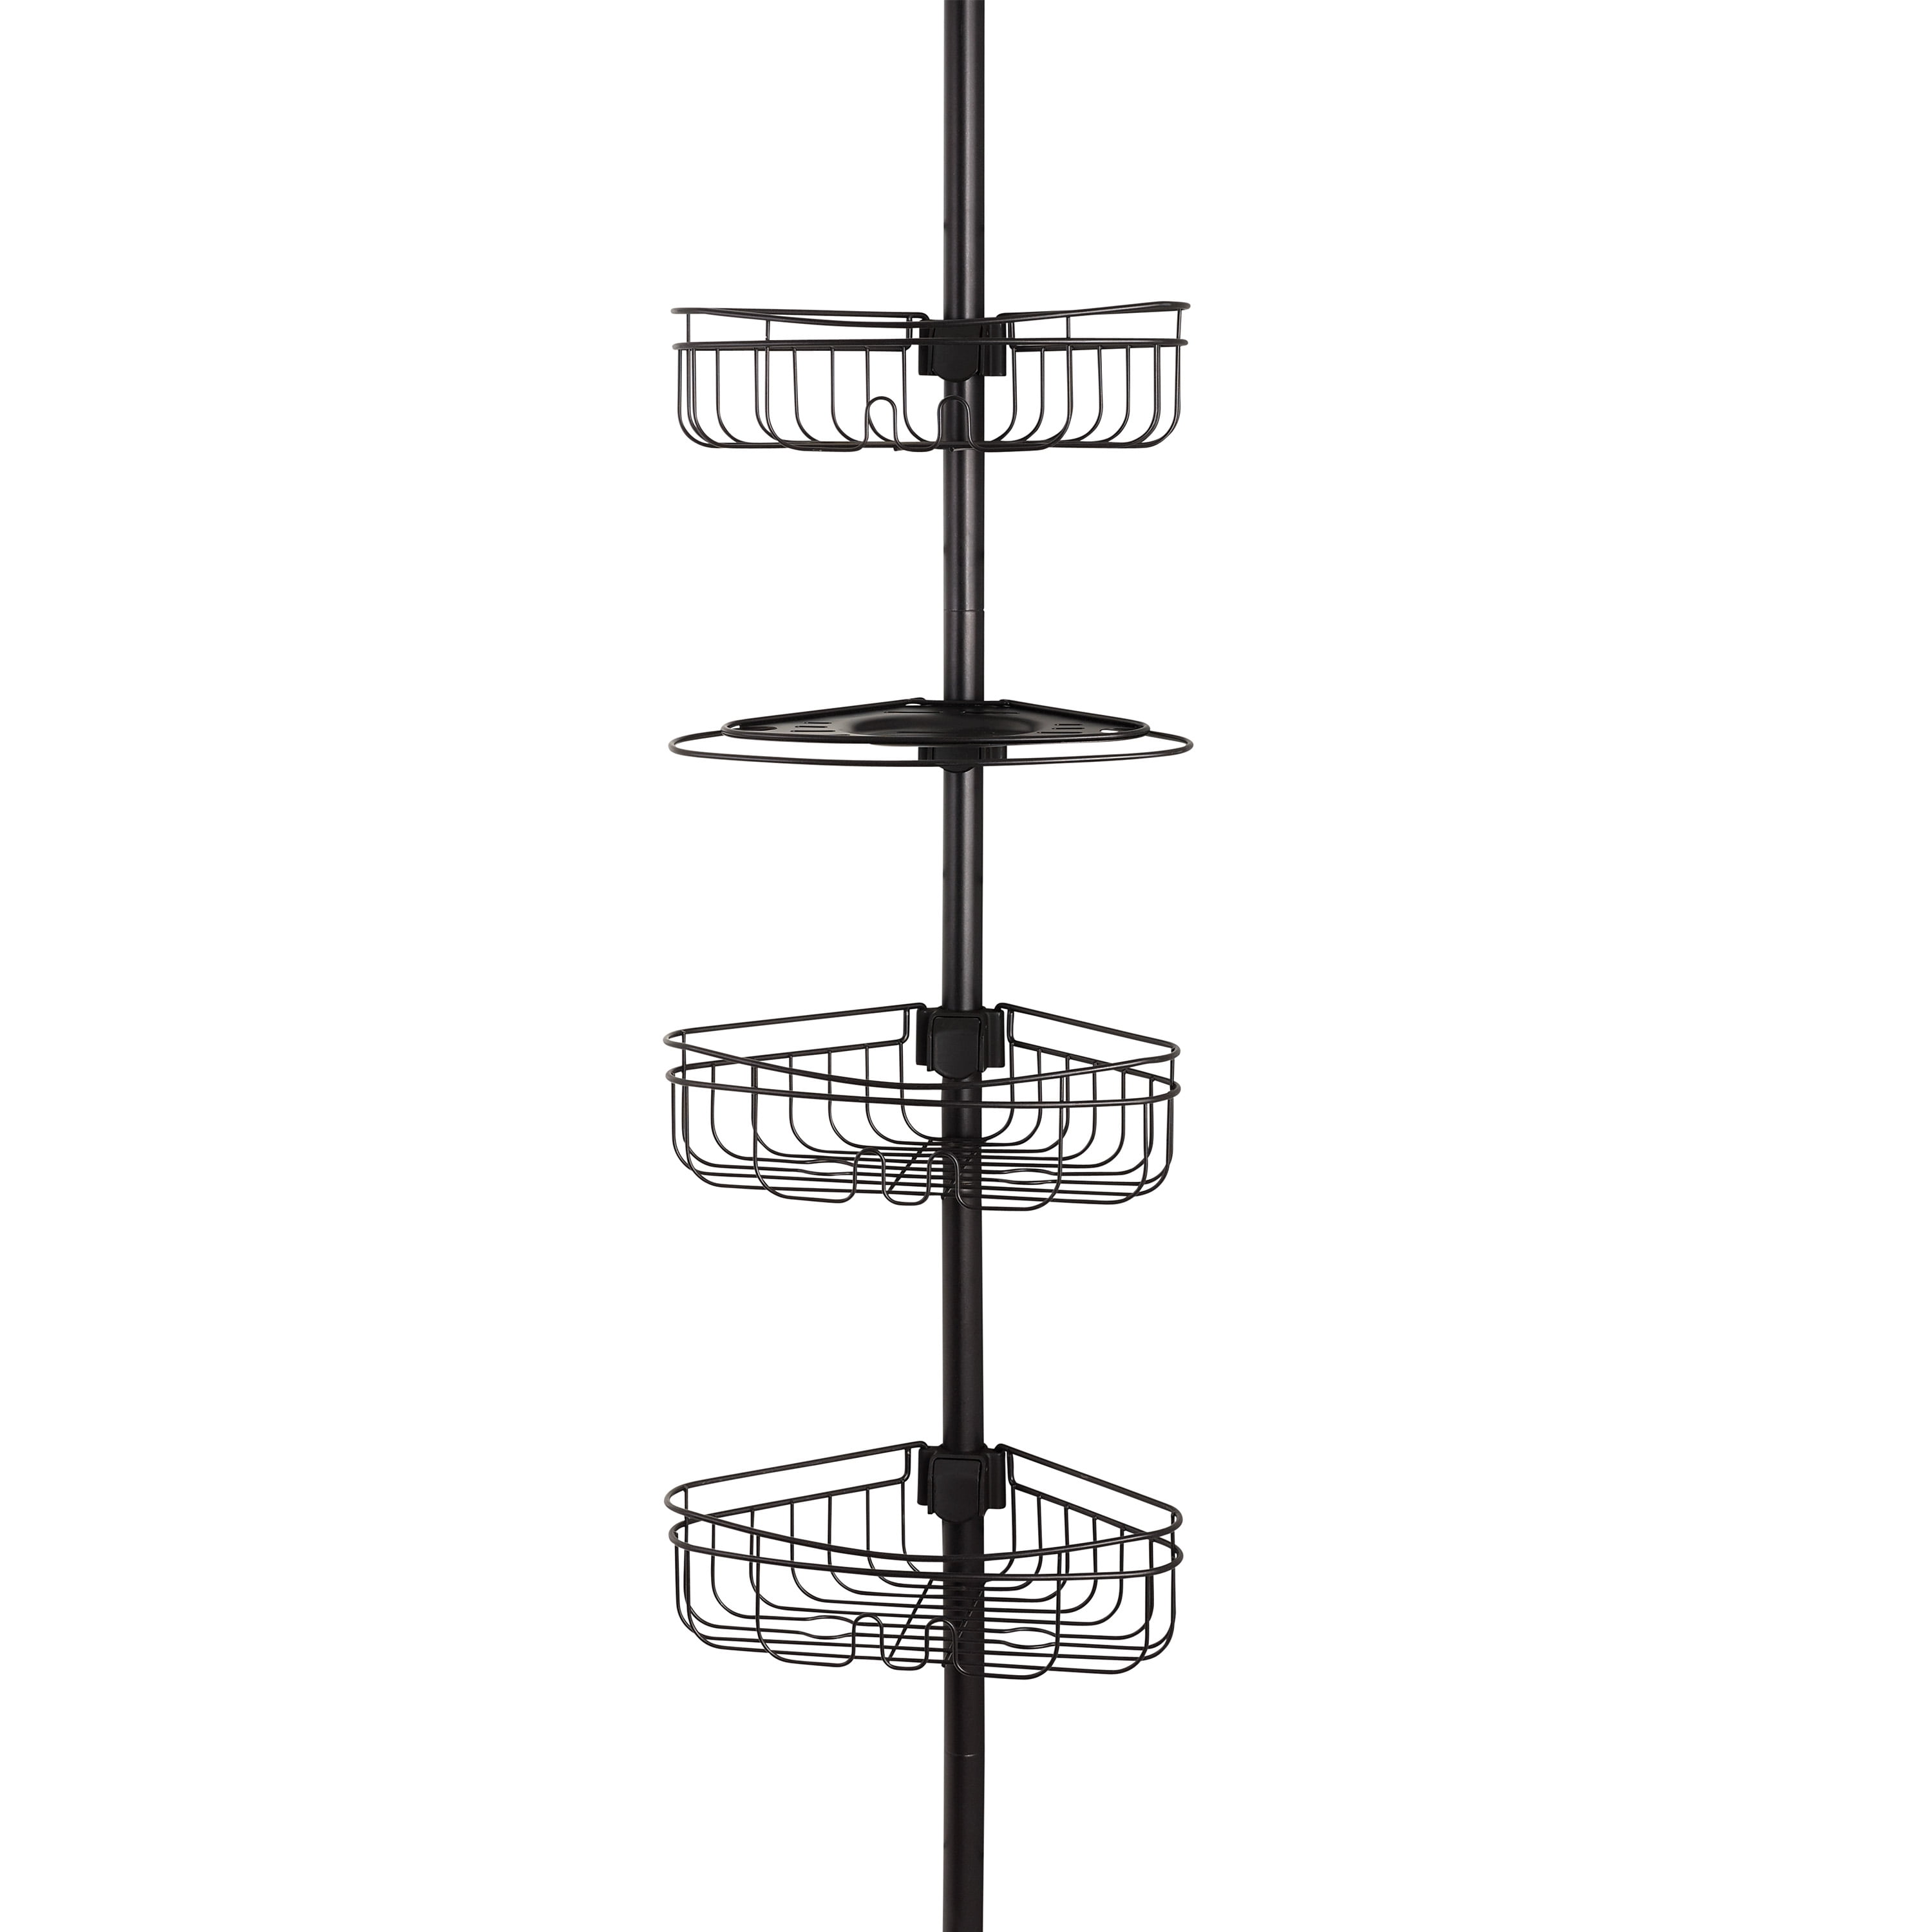 Oil Rubbed Bronze Details about   Zenna Home Shower Tension Pole Caddy 